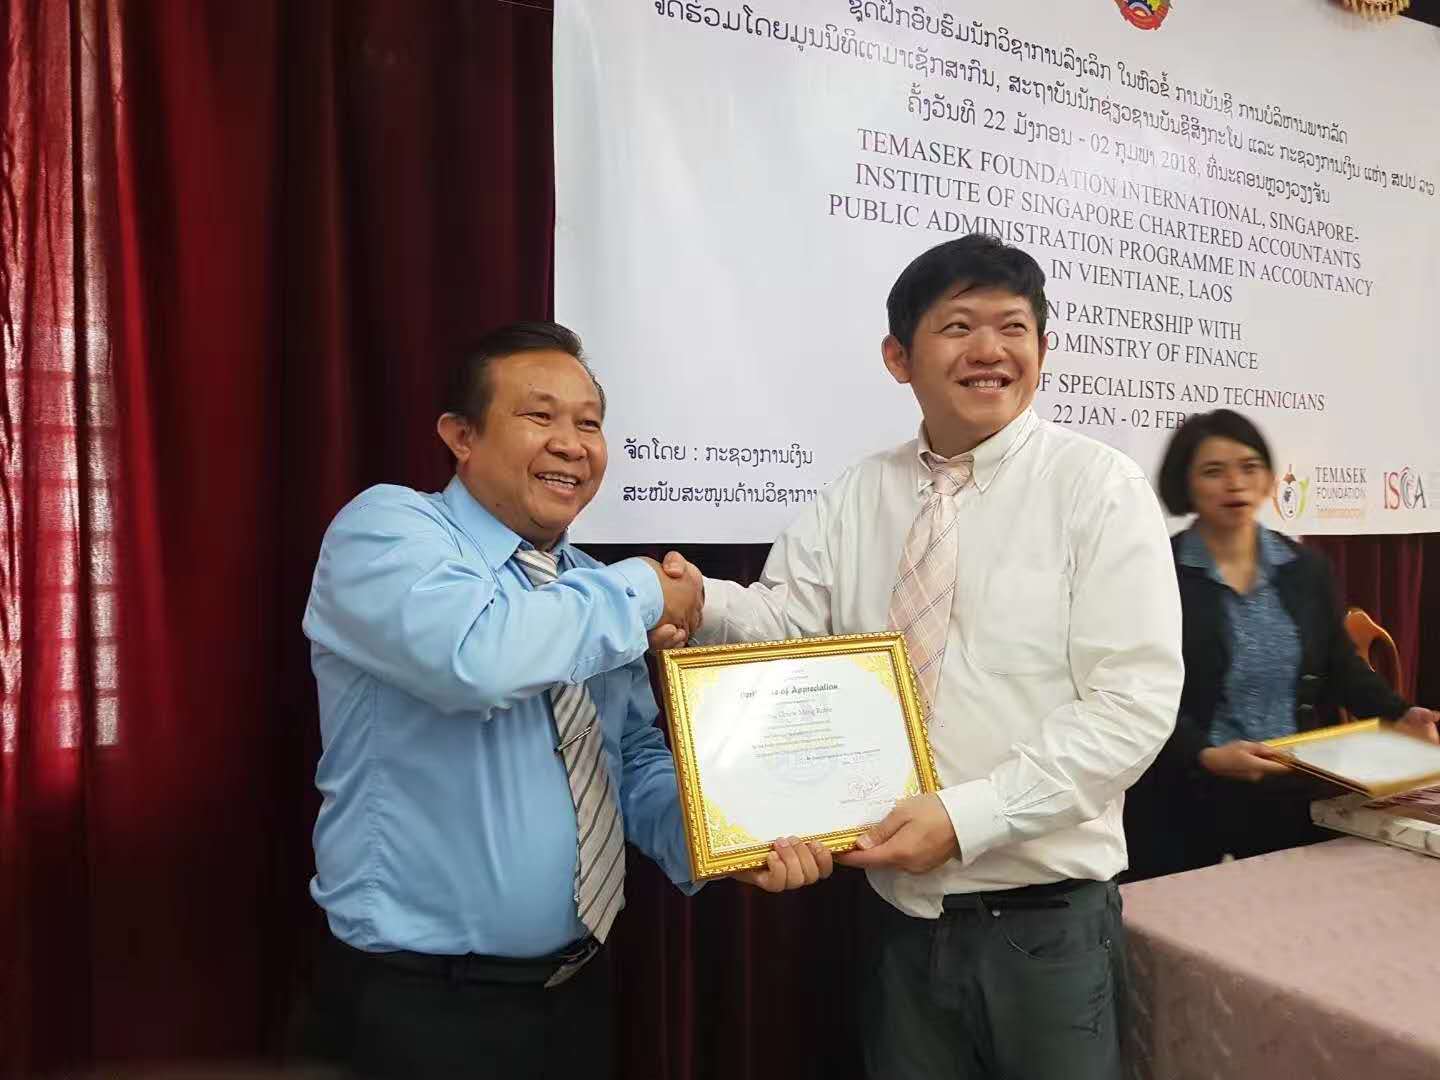 Represent ISCA to train training and capability building programme for specialist on principle of account, held in Vietnam, Laos.